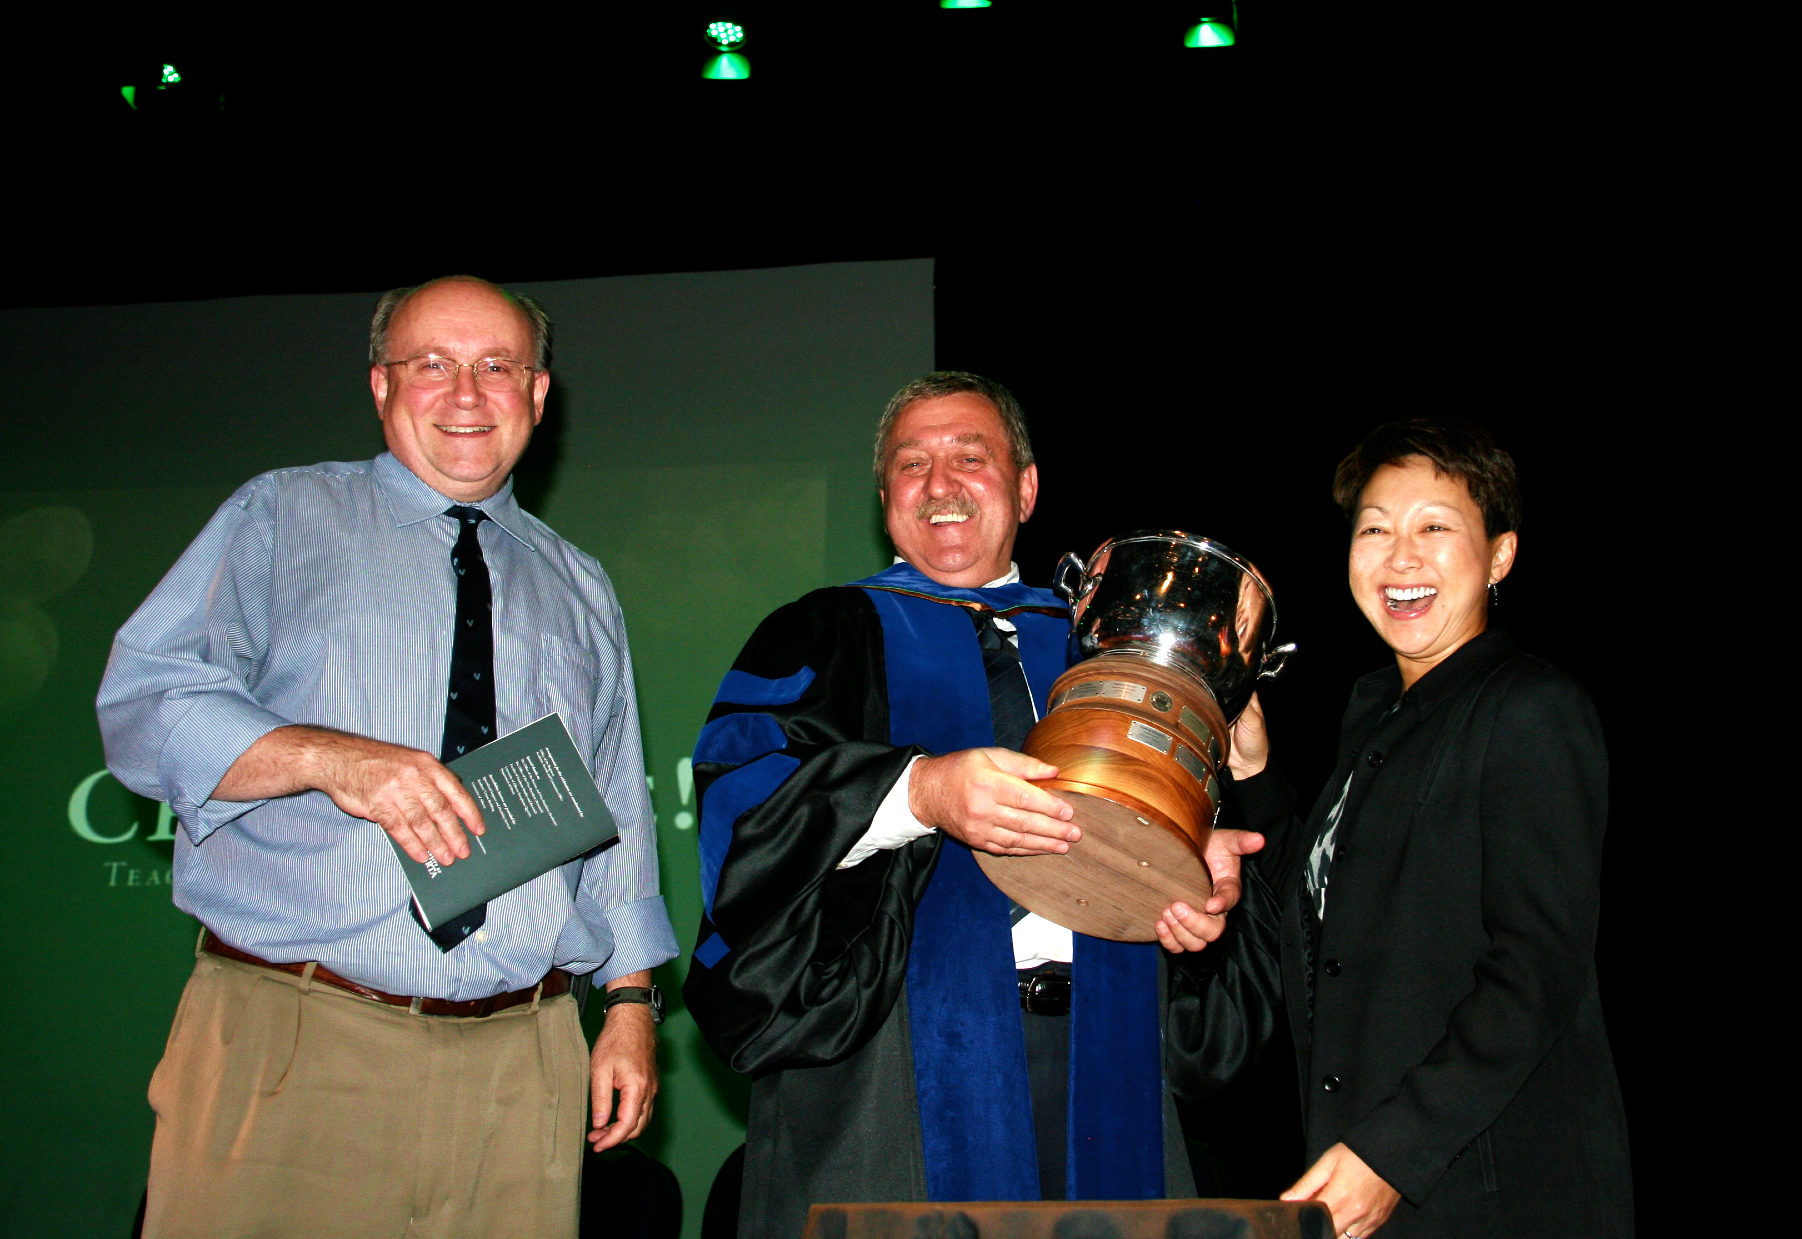 Marek Michalak holding the University Cup next to Charles Holmes and Verna Yiu in 2013